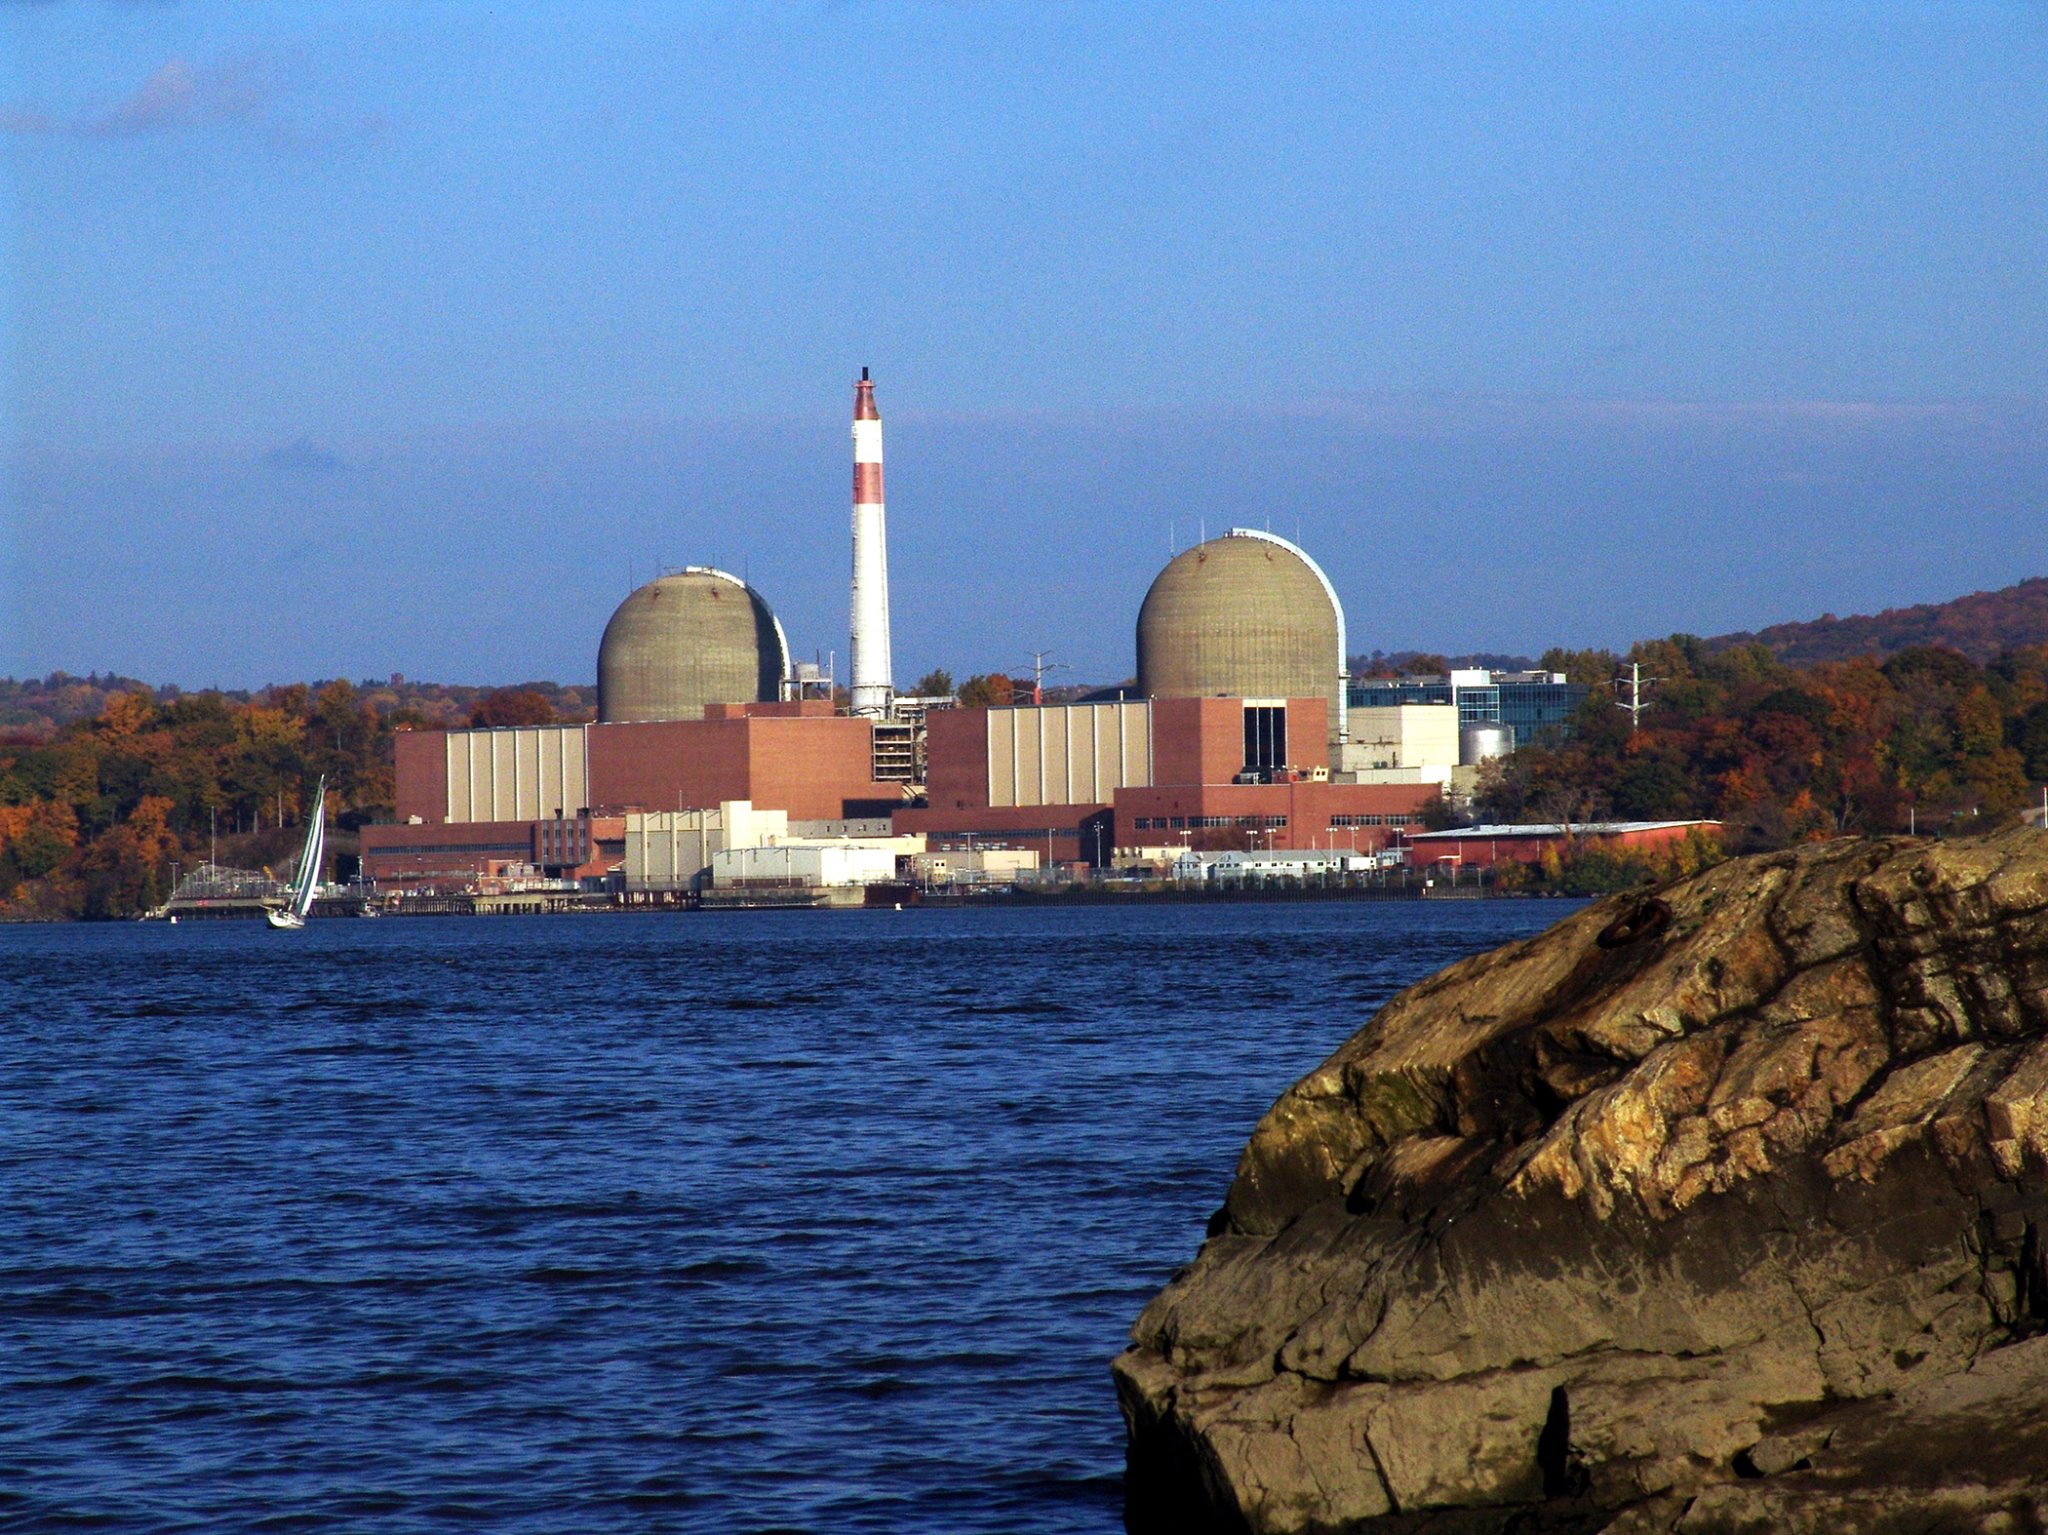 Governor Cuomo has been demanding Indian Point be closed since 2001, but it’s up to federal regulators.